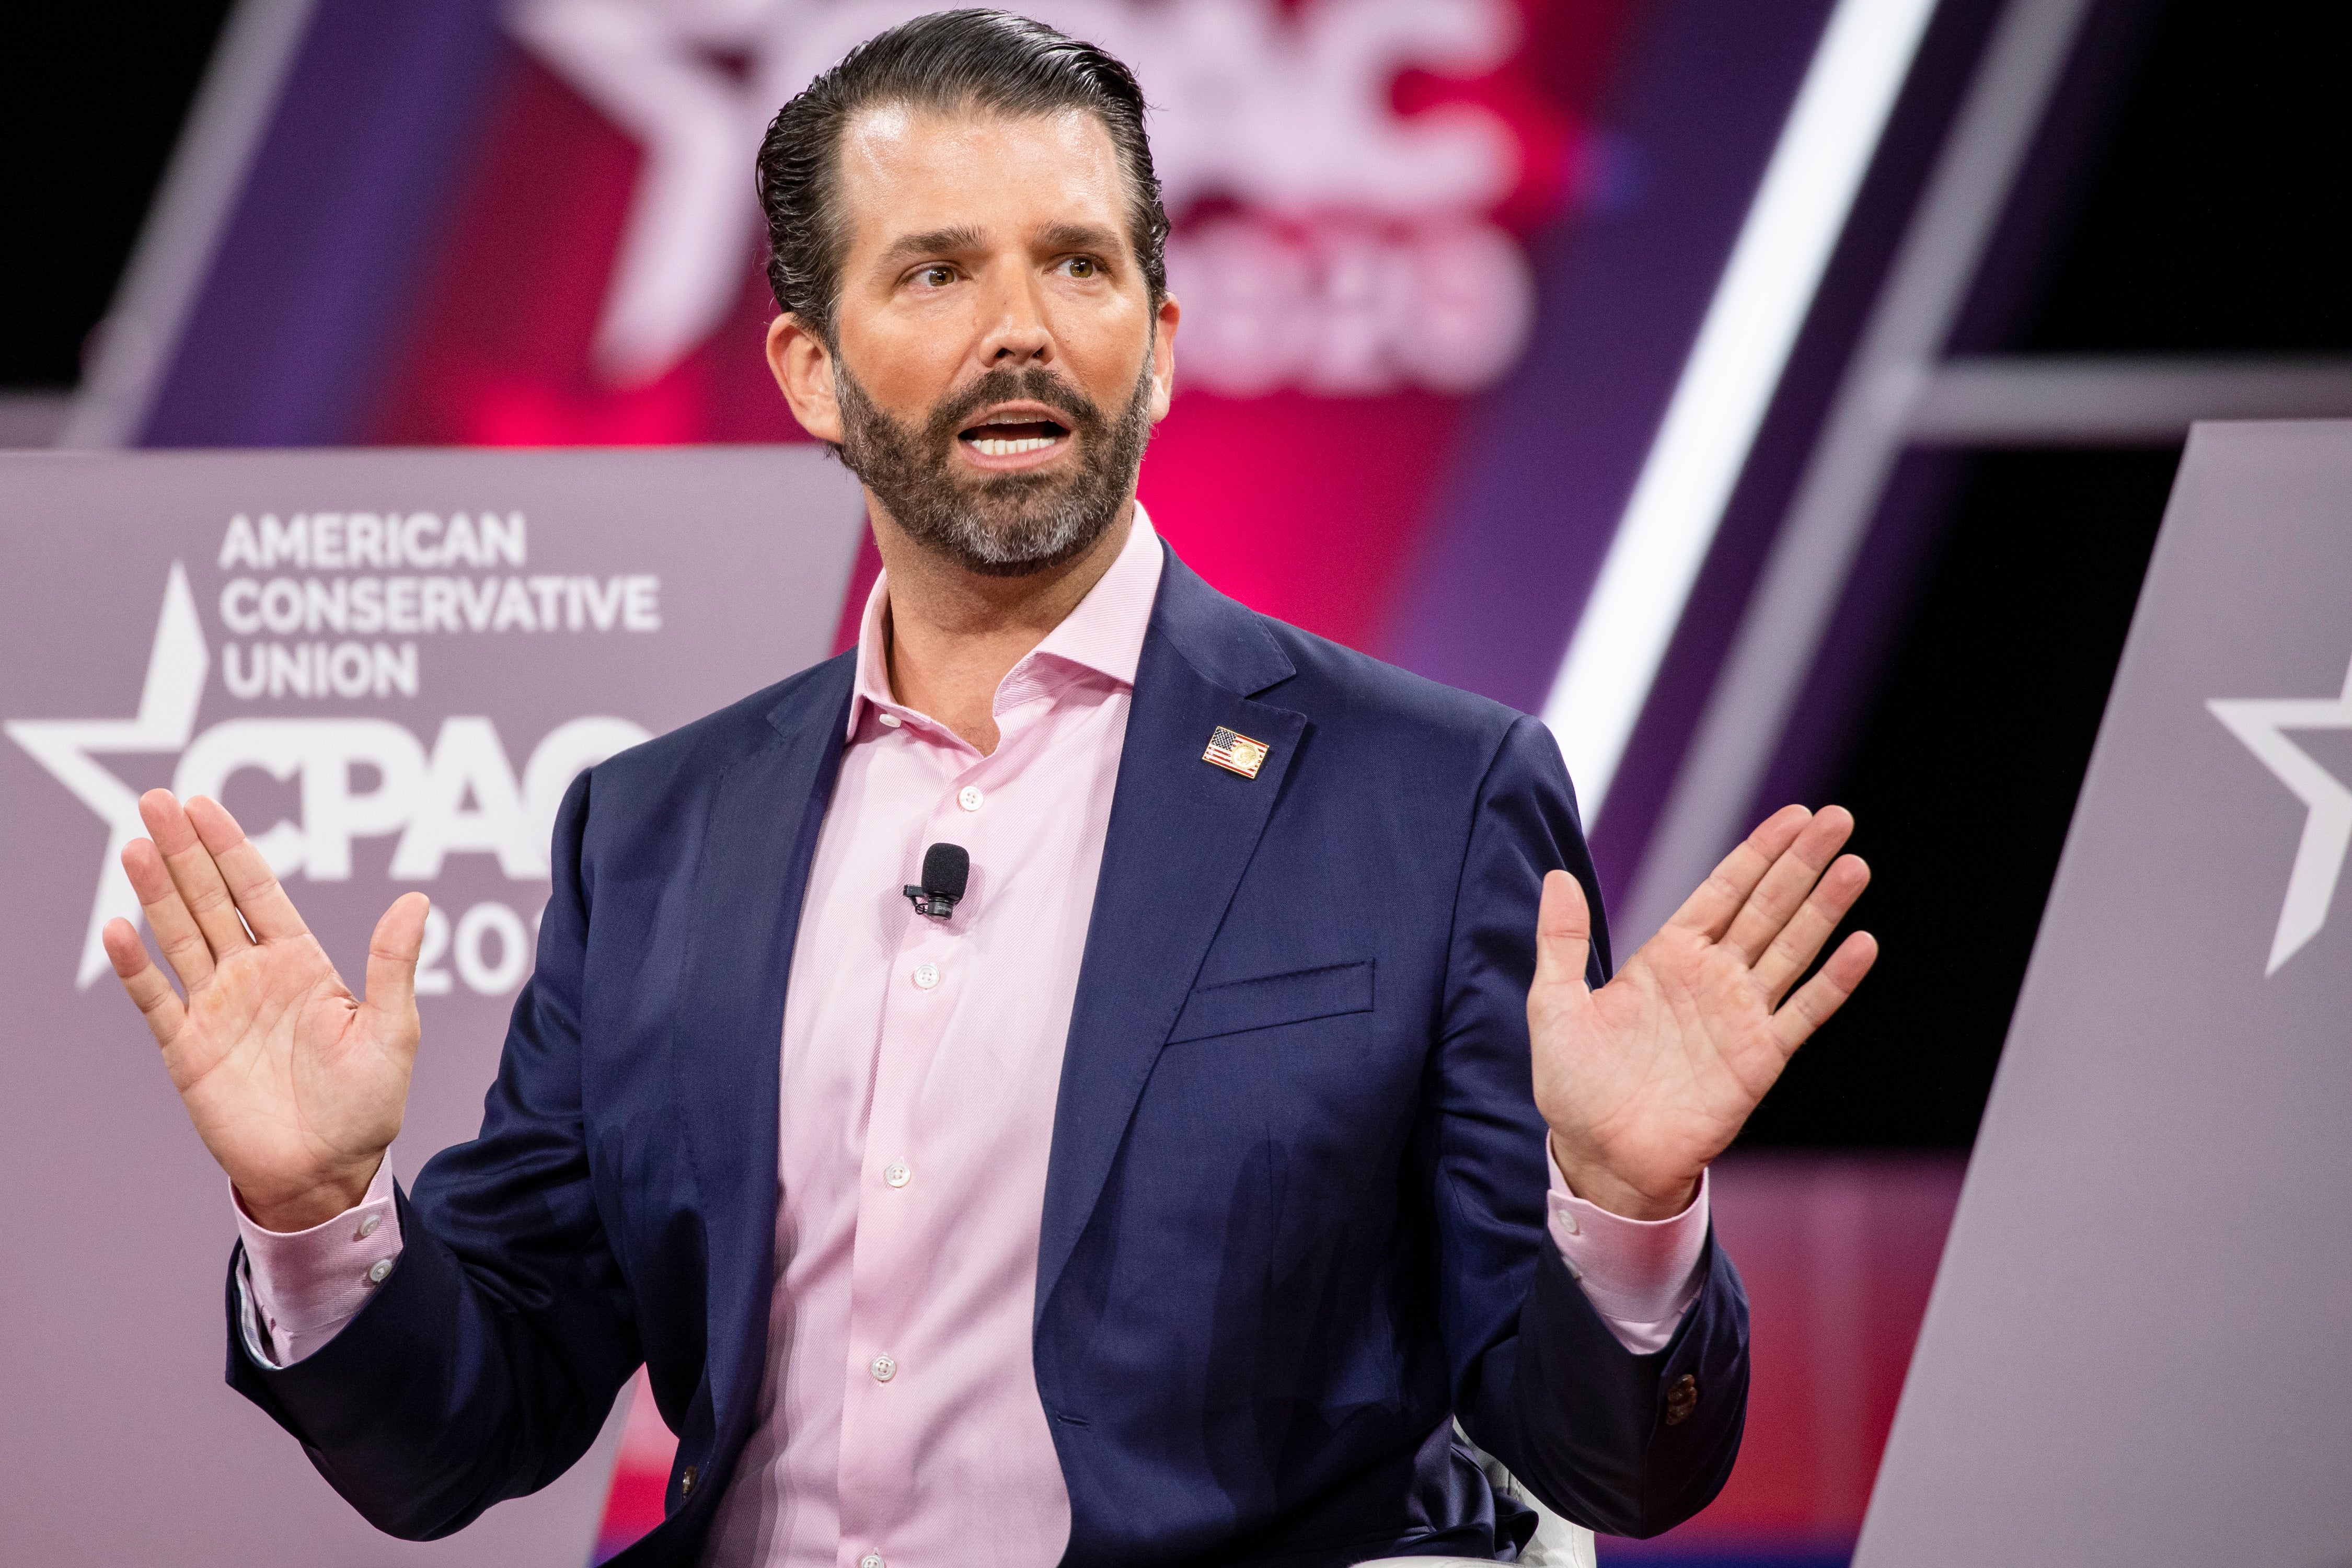 Donald Trump Jr posted a video which says: ‘When Democrats are in charge, no one is safe’